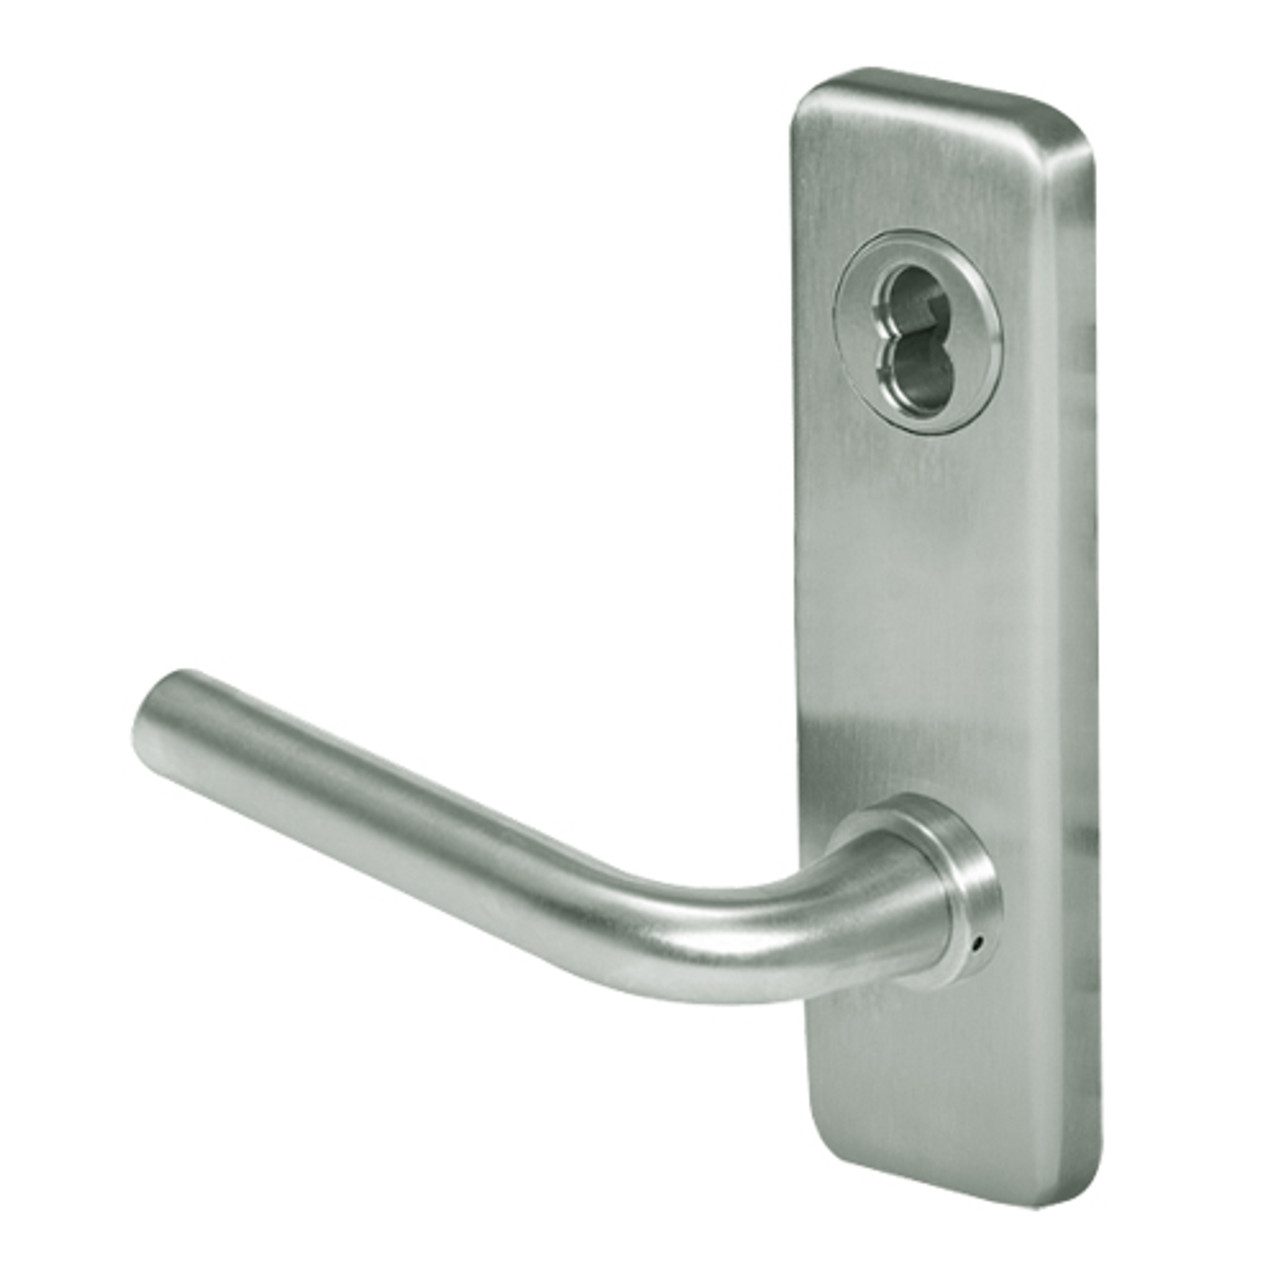 45HW7TWEL12J619RQE12V Best 40HW series Double Key Deadbolt Fail Safe Electromechanical Mortise Lever Lock with Solid Tube w/ No Return Style in Satin Nickel